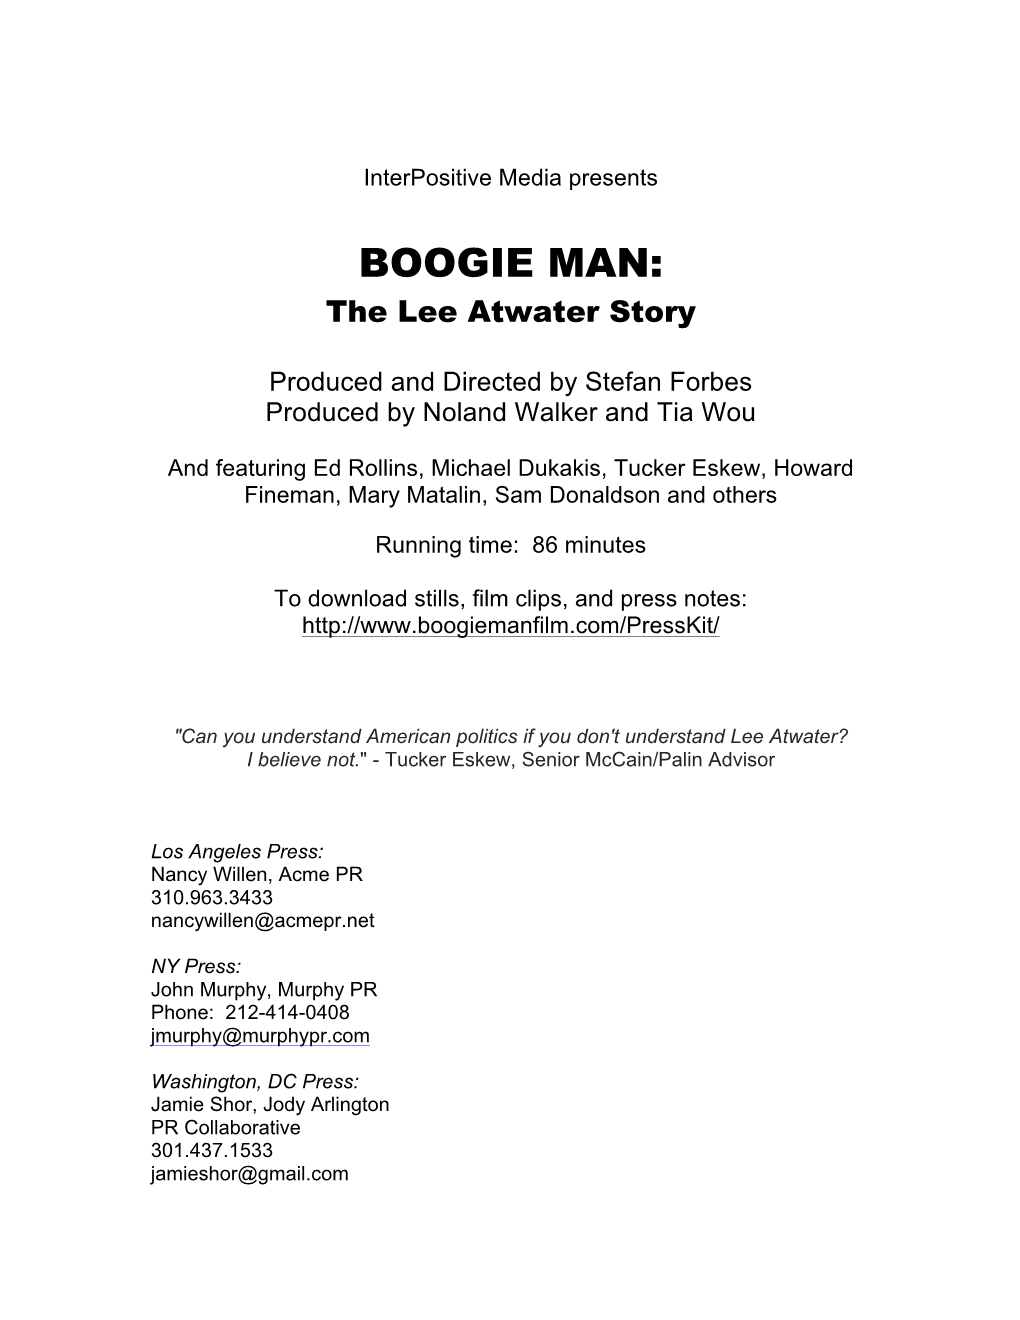 BOOGIE MAN: the Lee Atwater Story